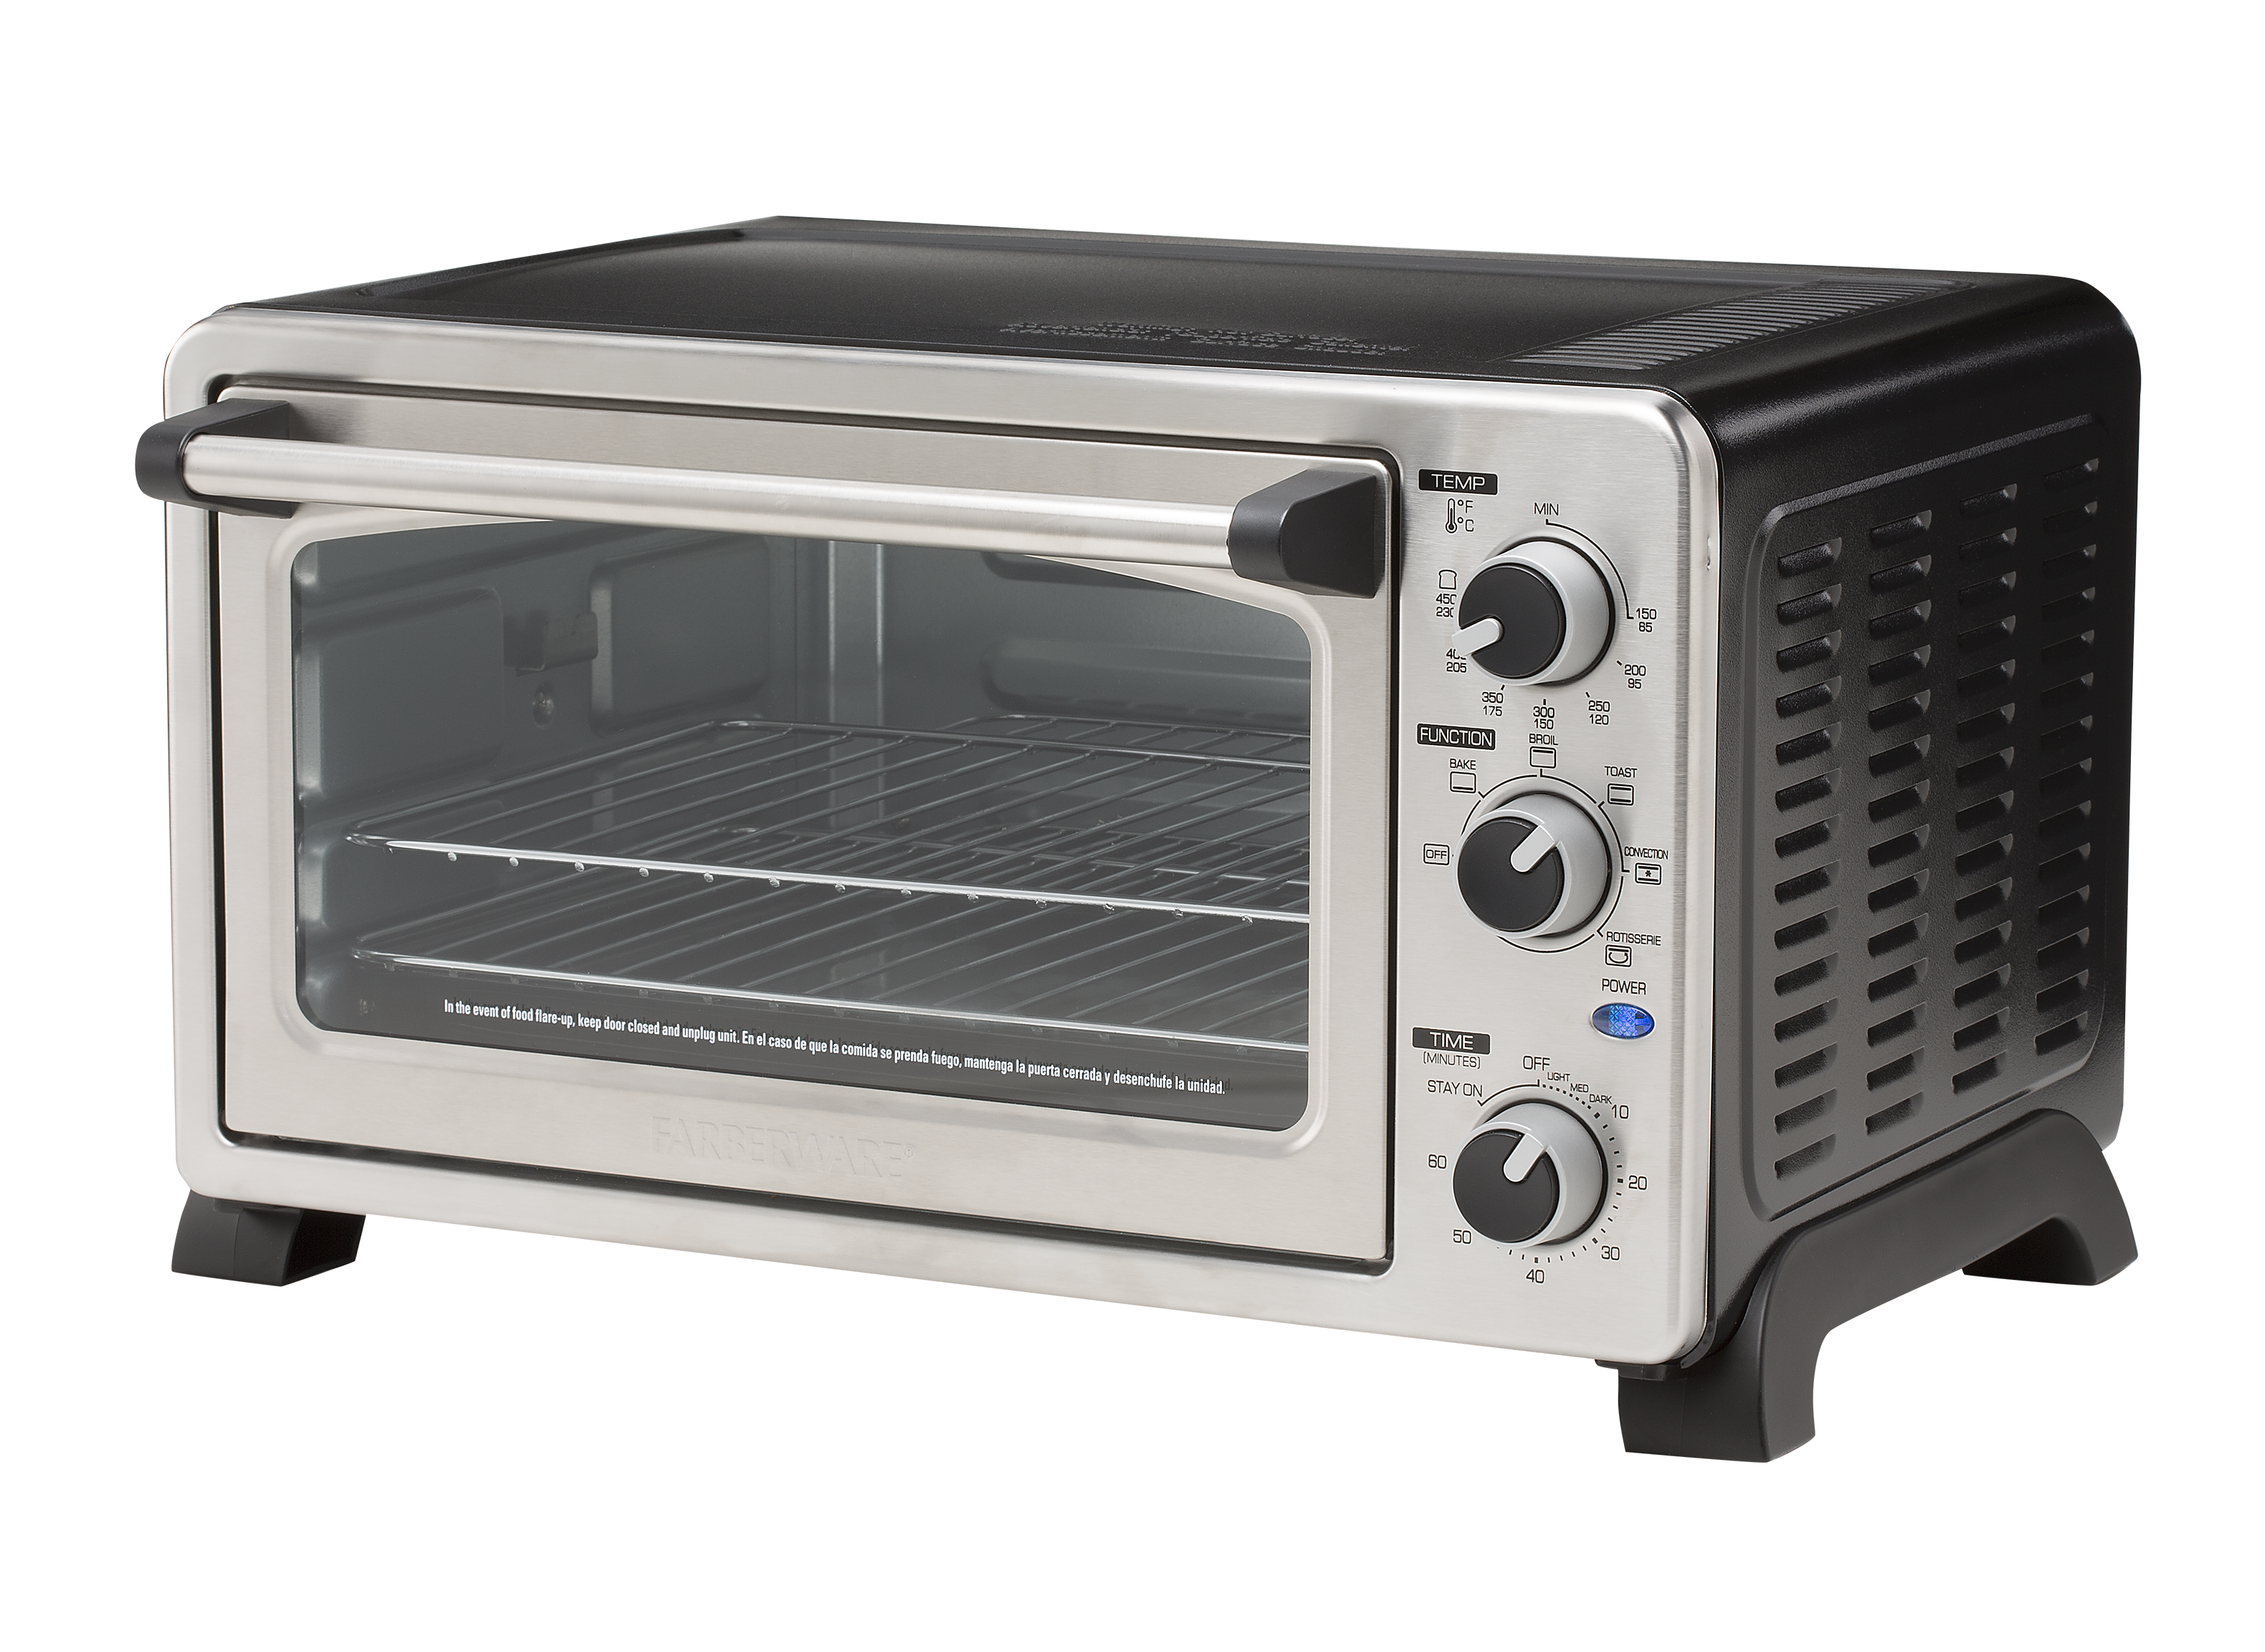 https://crdms.images.consumerreports.org/prod/products/cr/models/384789-toasterovens-farberware-stainlesssteelmc25cexoven.png